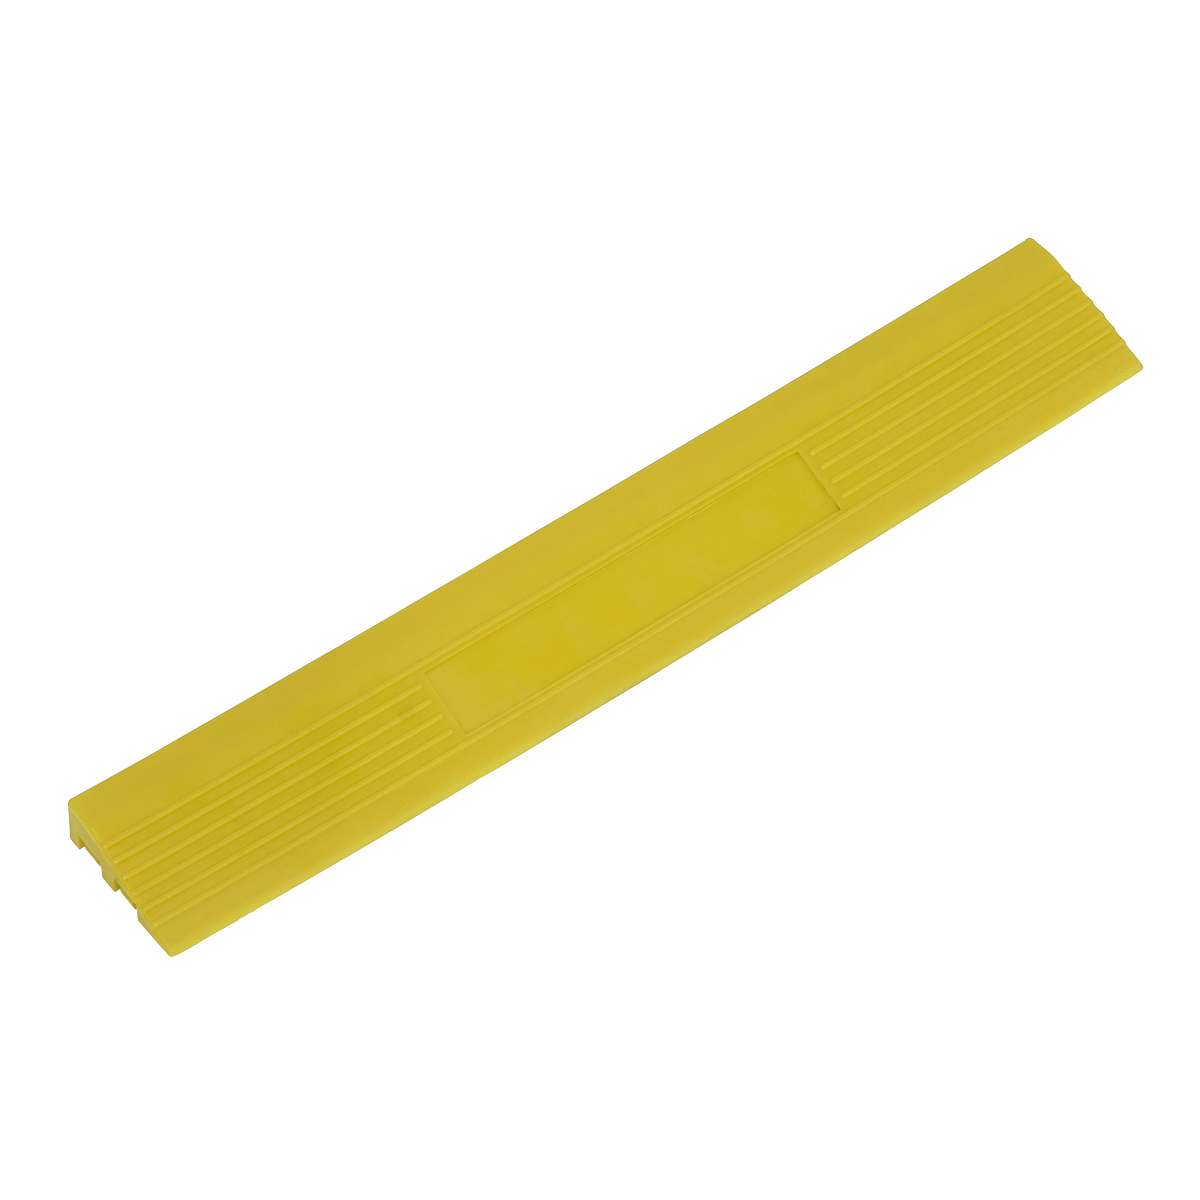 Polypropylene Floor Tile Edge 400 x 60mm Yellow Male - Pack of 6 - FT3EYM - Farming Parts